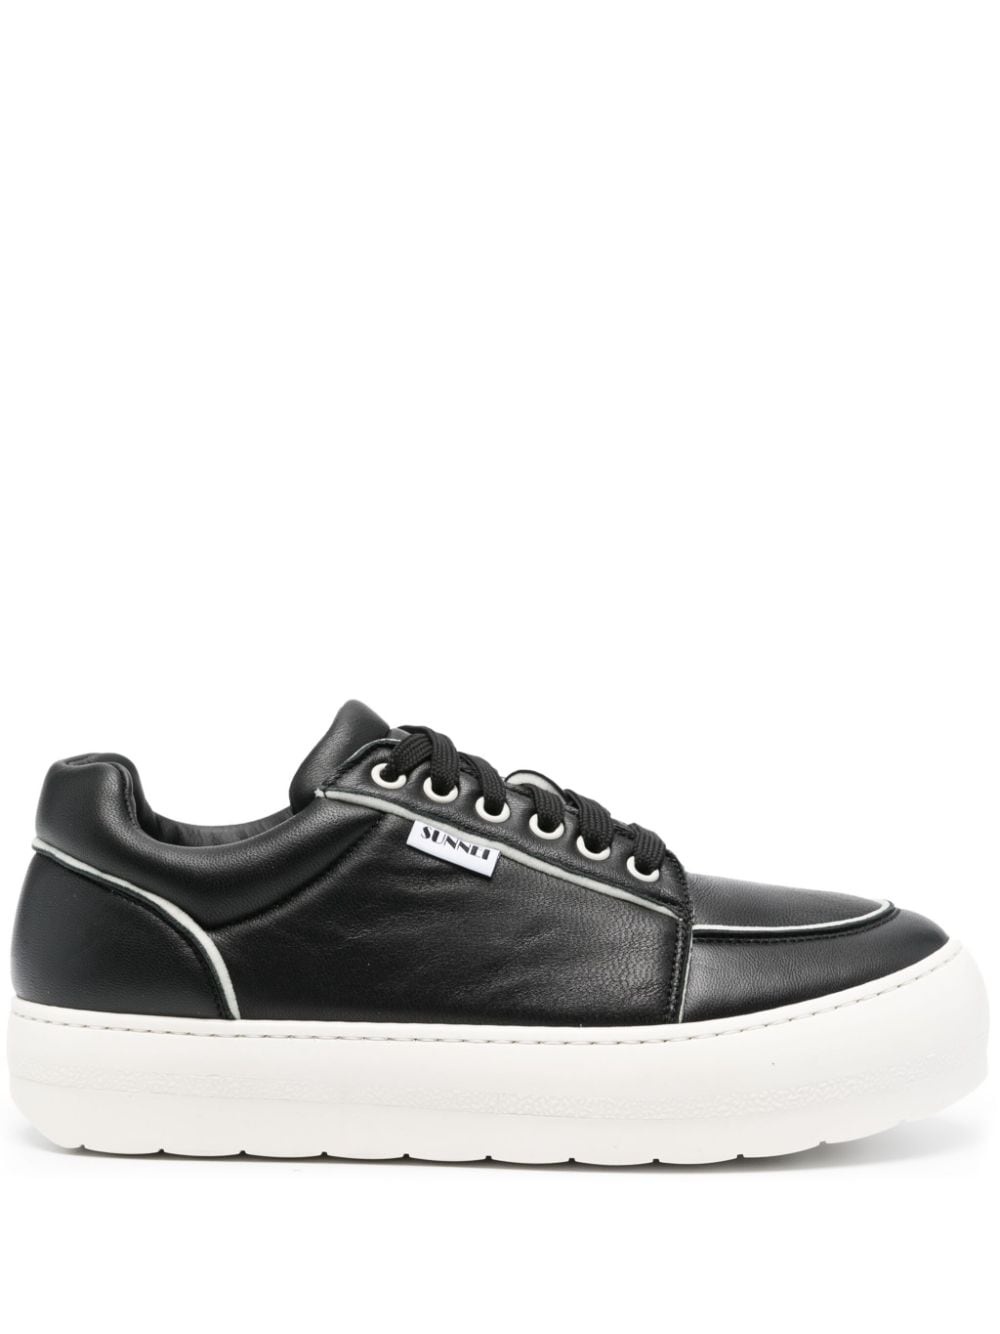 Dreamy leather flatform sneakers - 1